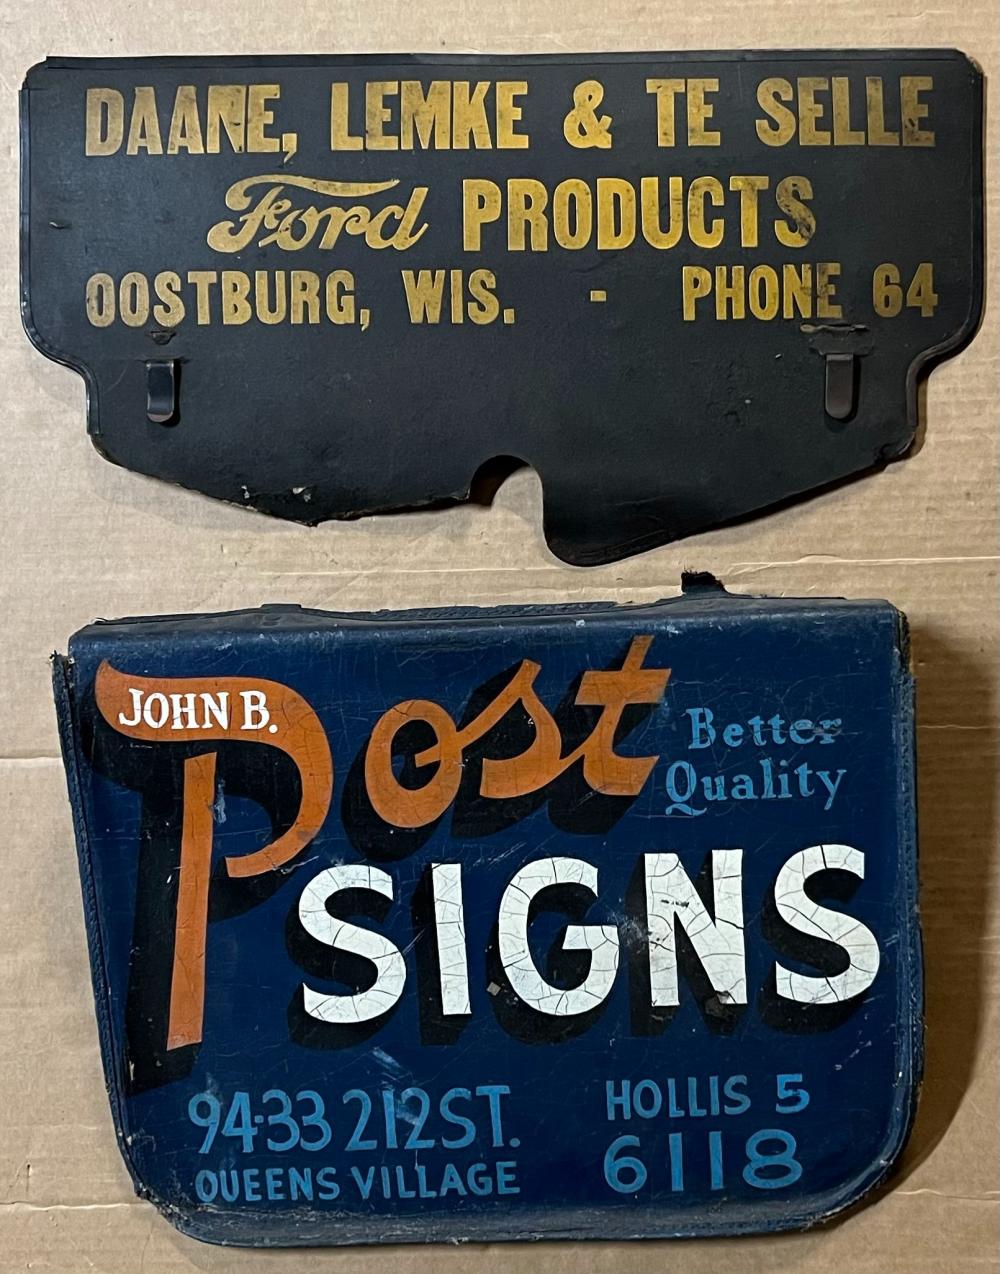 TWO ADVERTISING ITEMS FORD MODEL 2e293c